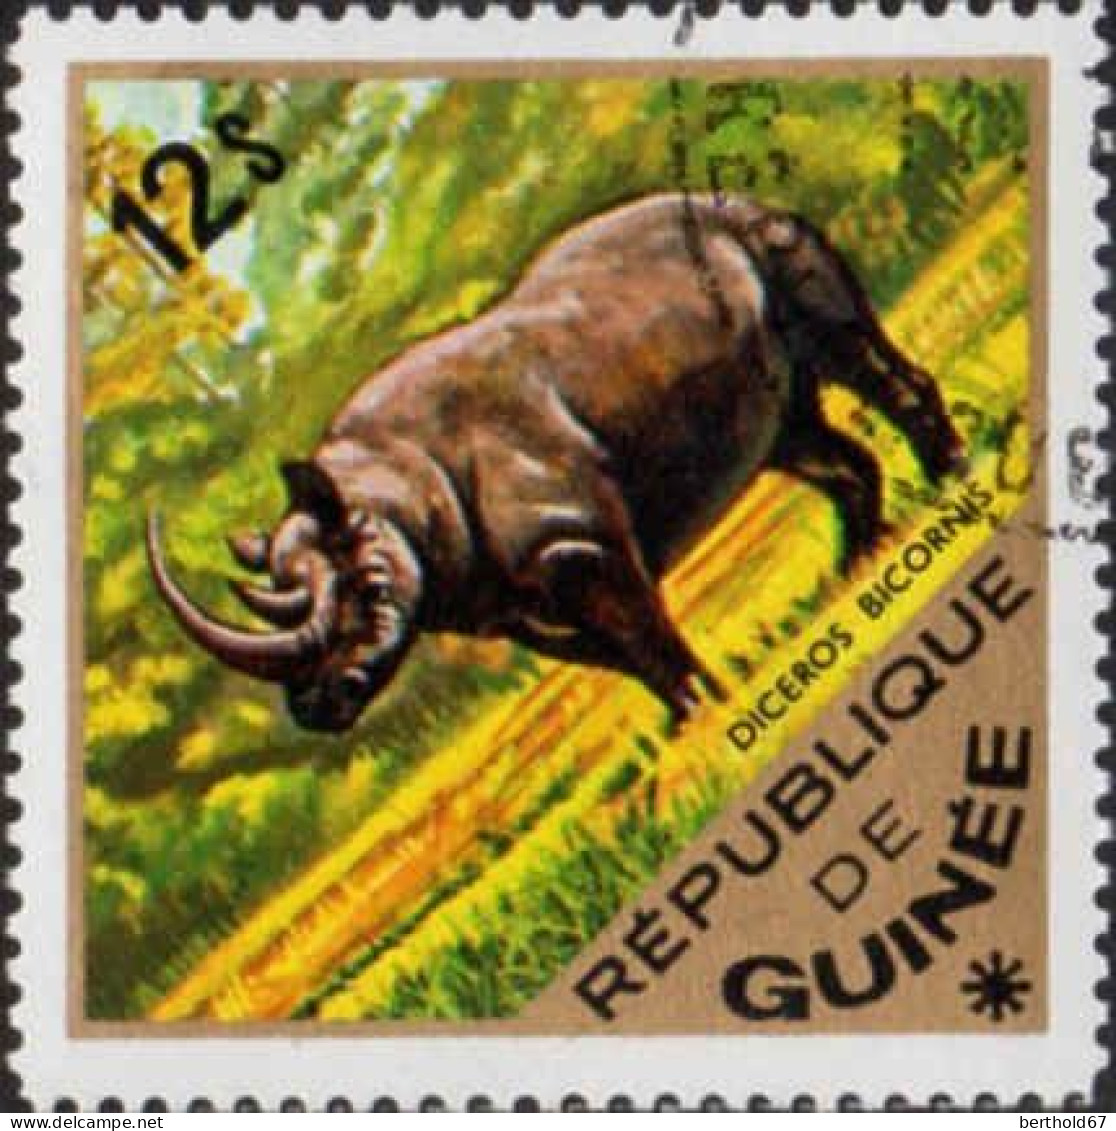 Guinée (Rep) Poste Obl Yv: 539/550 Faune africaine (Beau cachet rond)